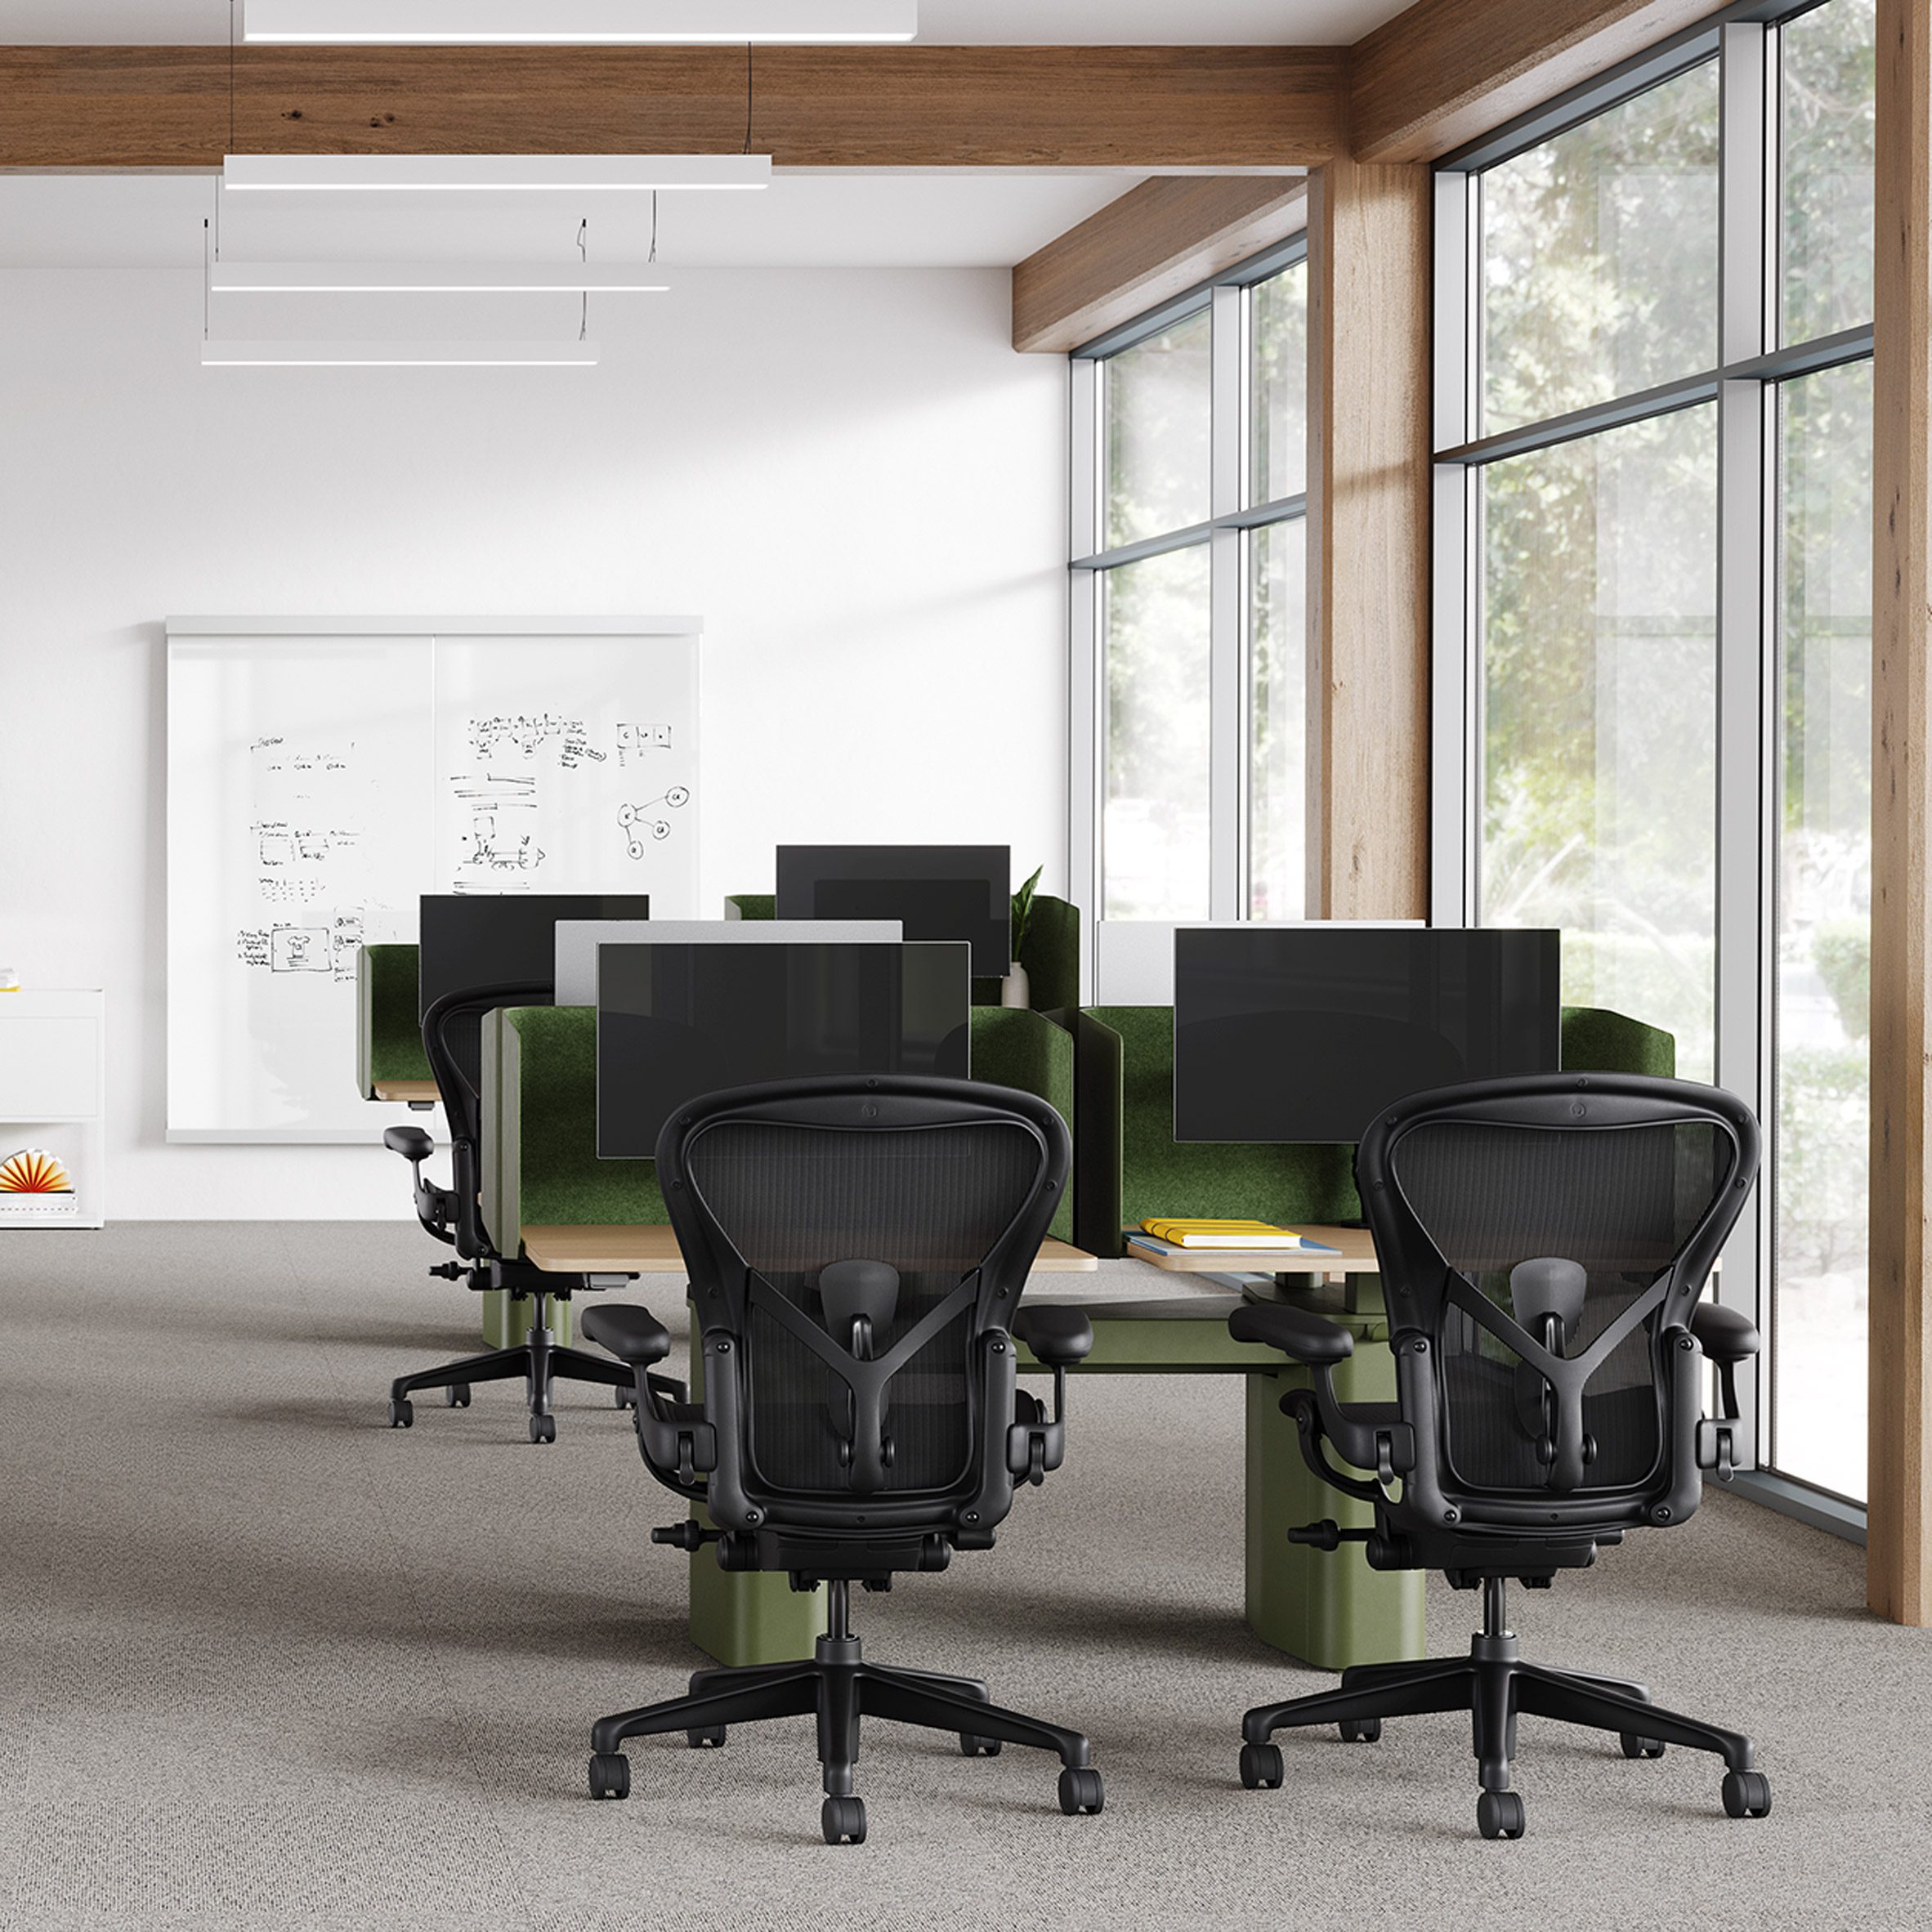 Aeron chairs in a workspace